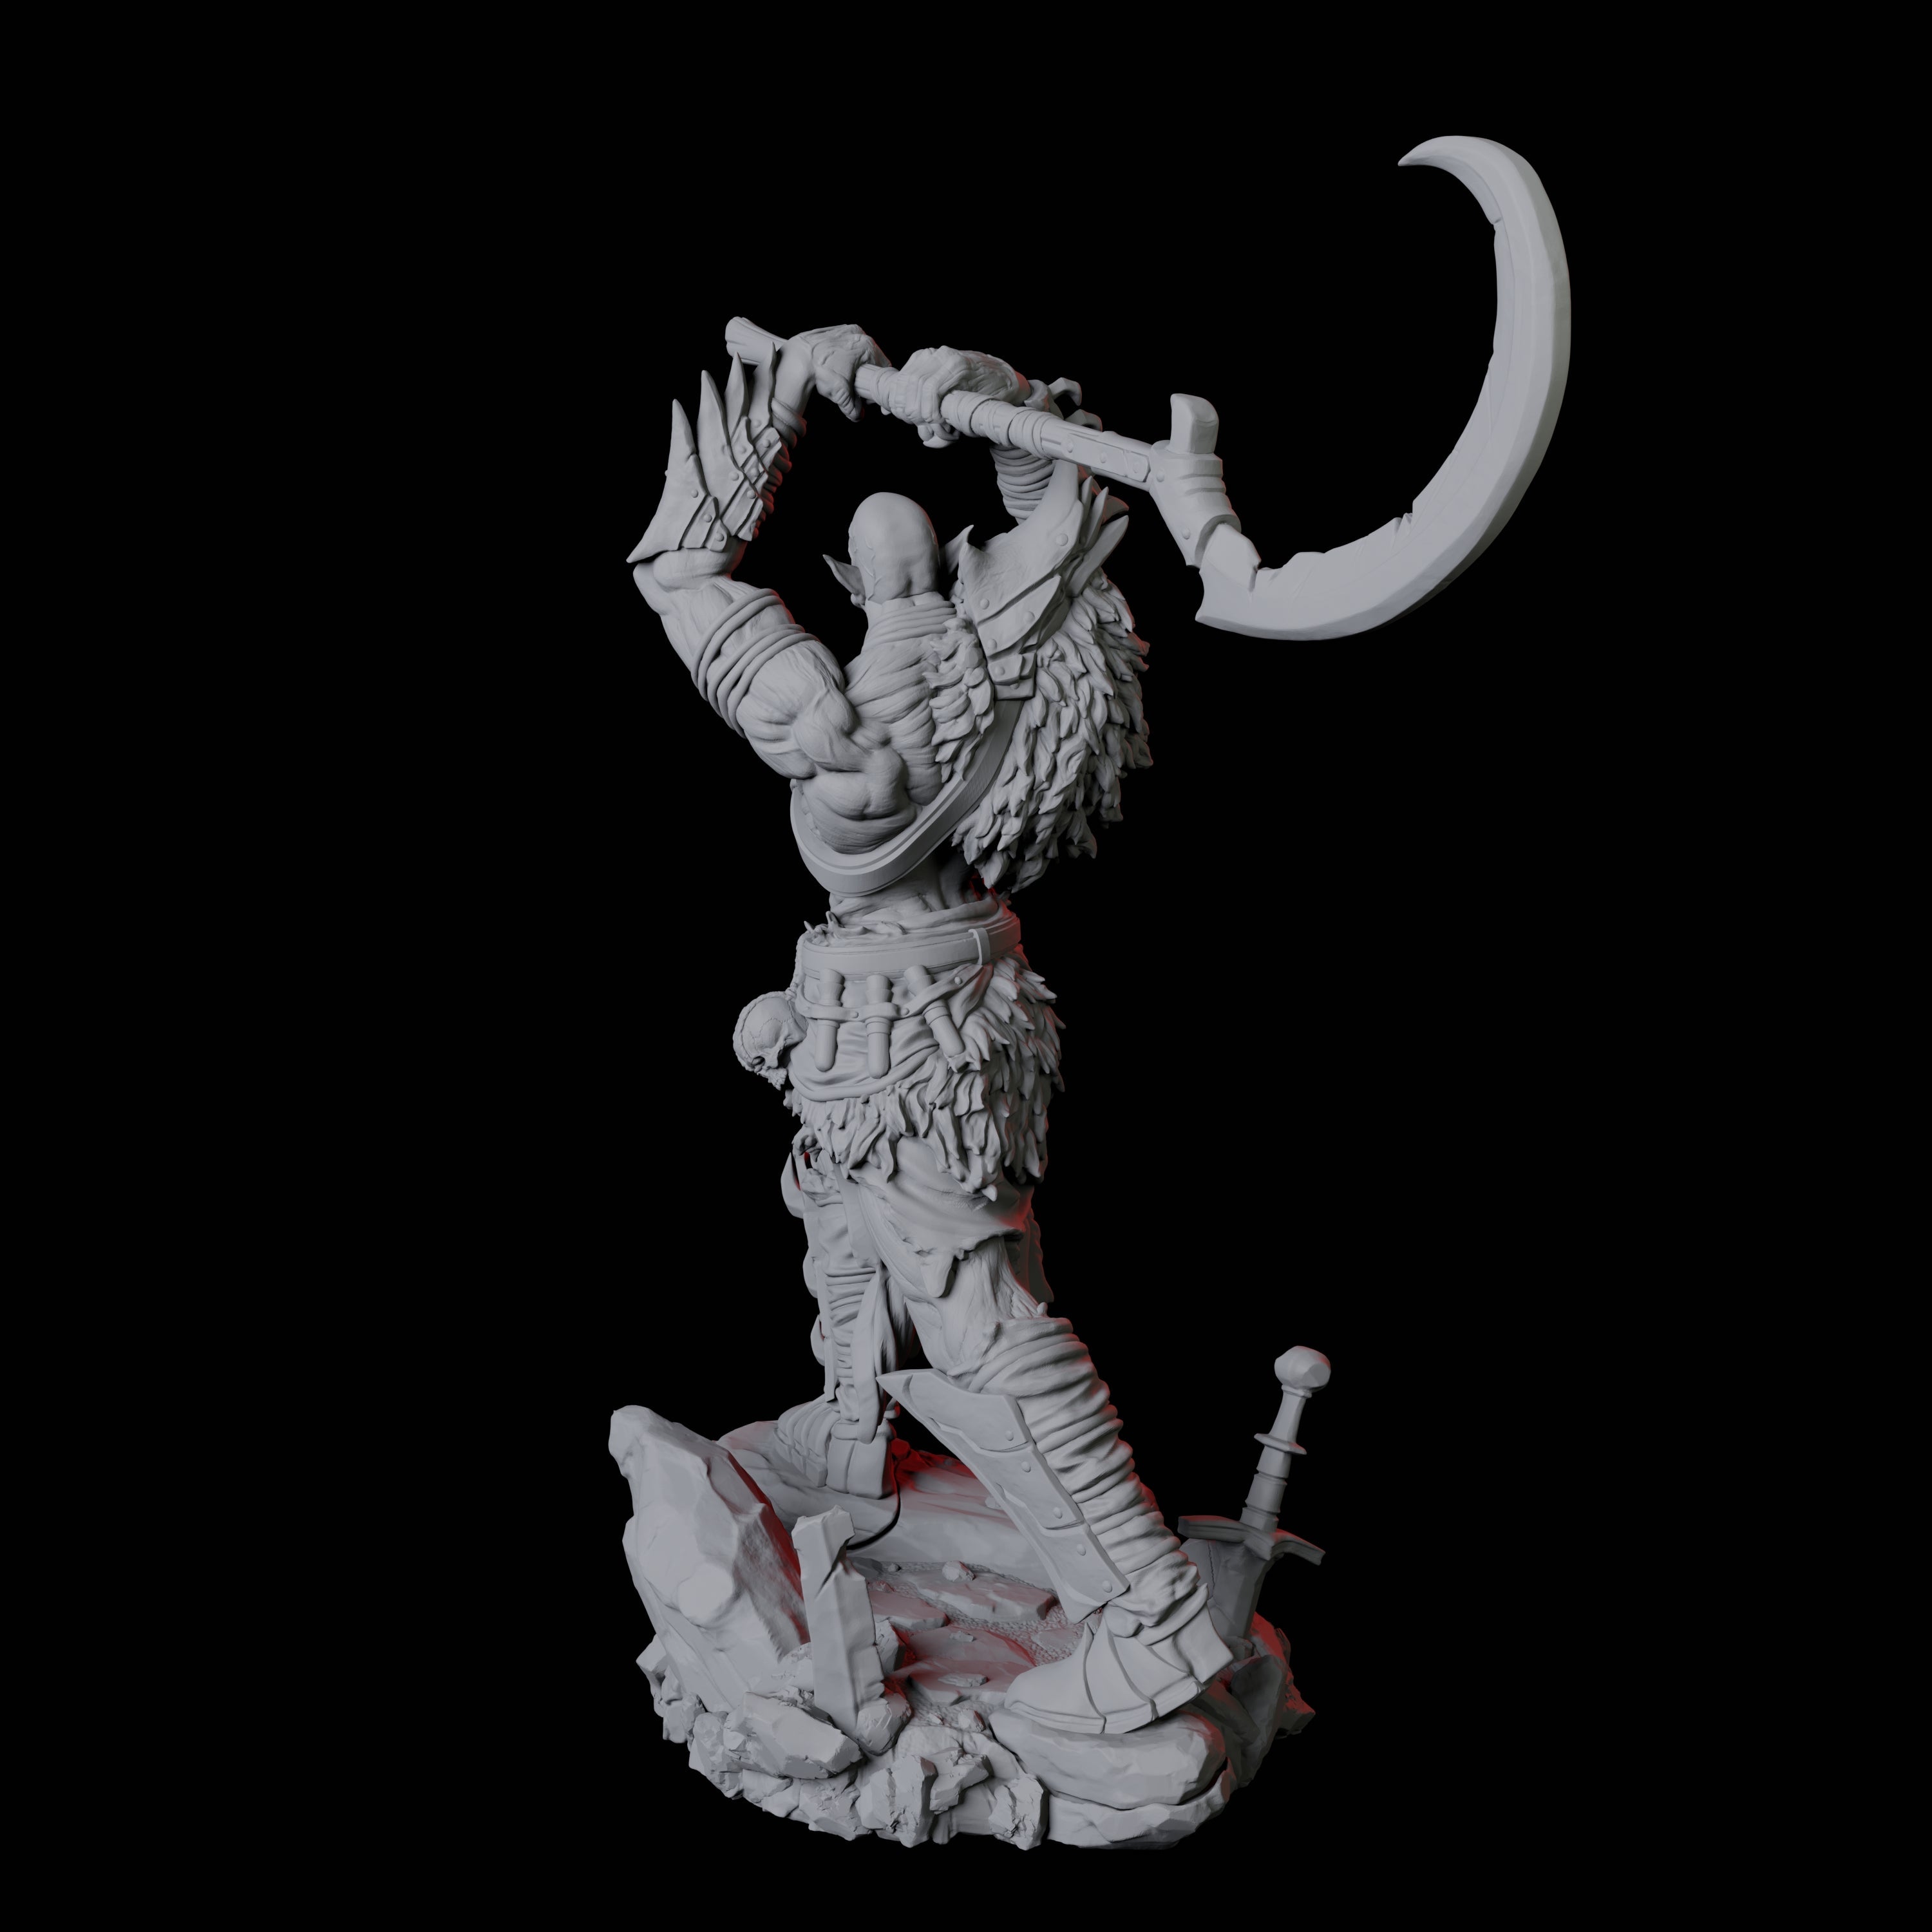 Stalking Urdefhan Warrior D Miniature for Dungeons and Dragons, Pathfinder or other TTRPGs